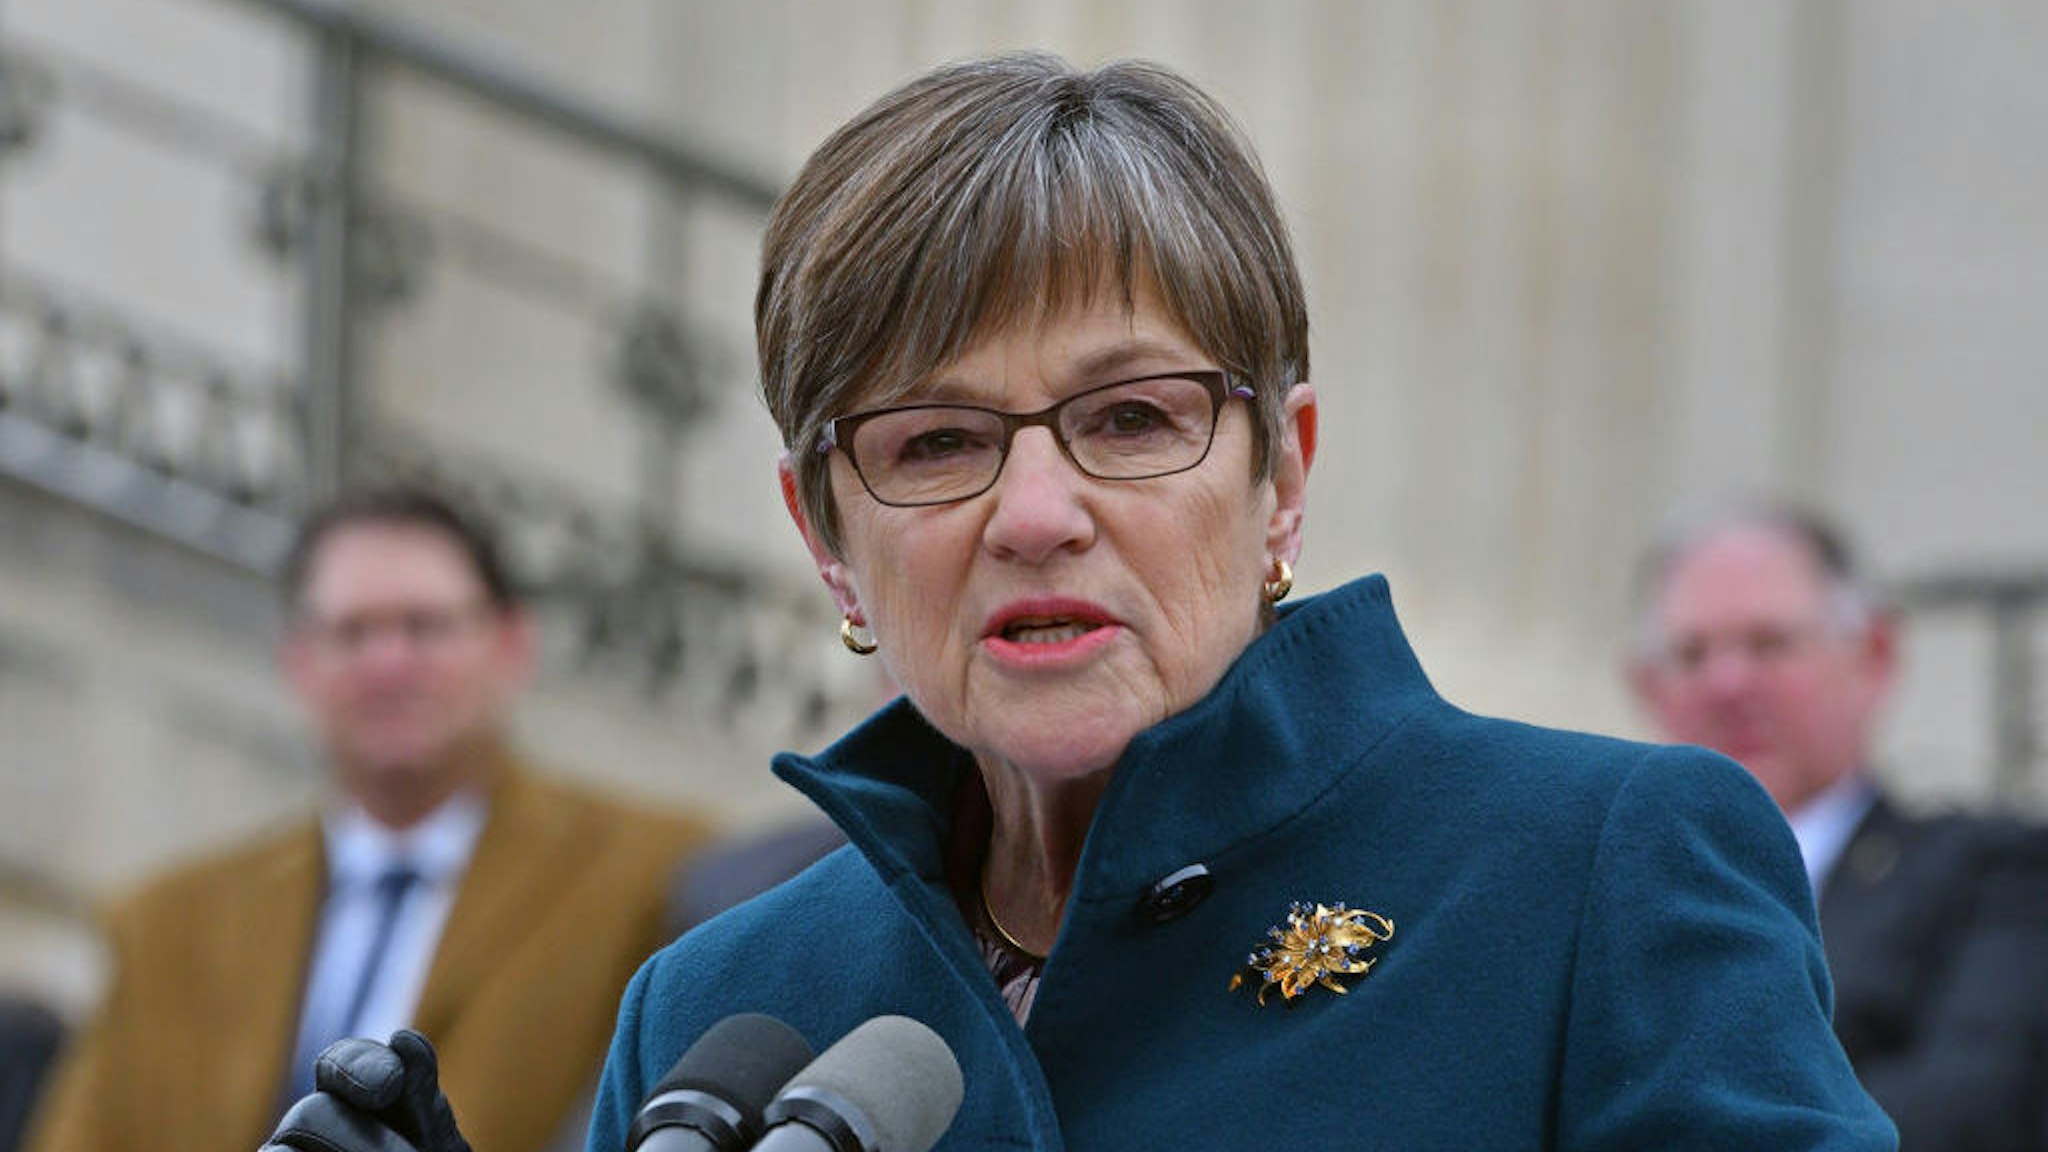 American politician Kansas Governor Laura Kelly delivers her inaugural speech from the front steps of the Kansas State Capitol building, Topeka, Kansas January 14, 2019. (Photo by Mark Reinstein/Corbis via Getty Images)